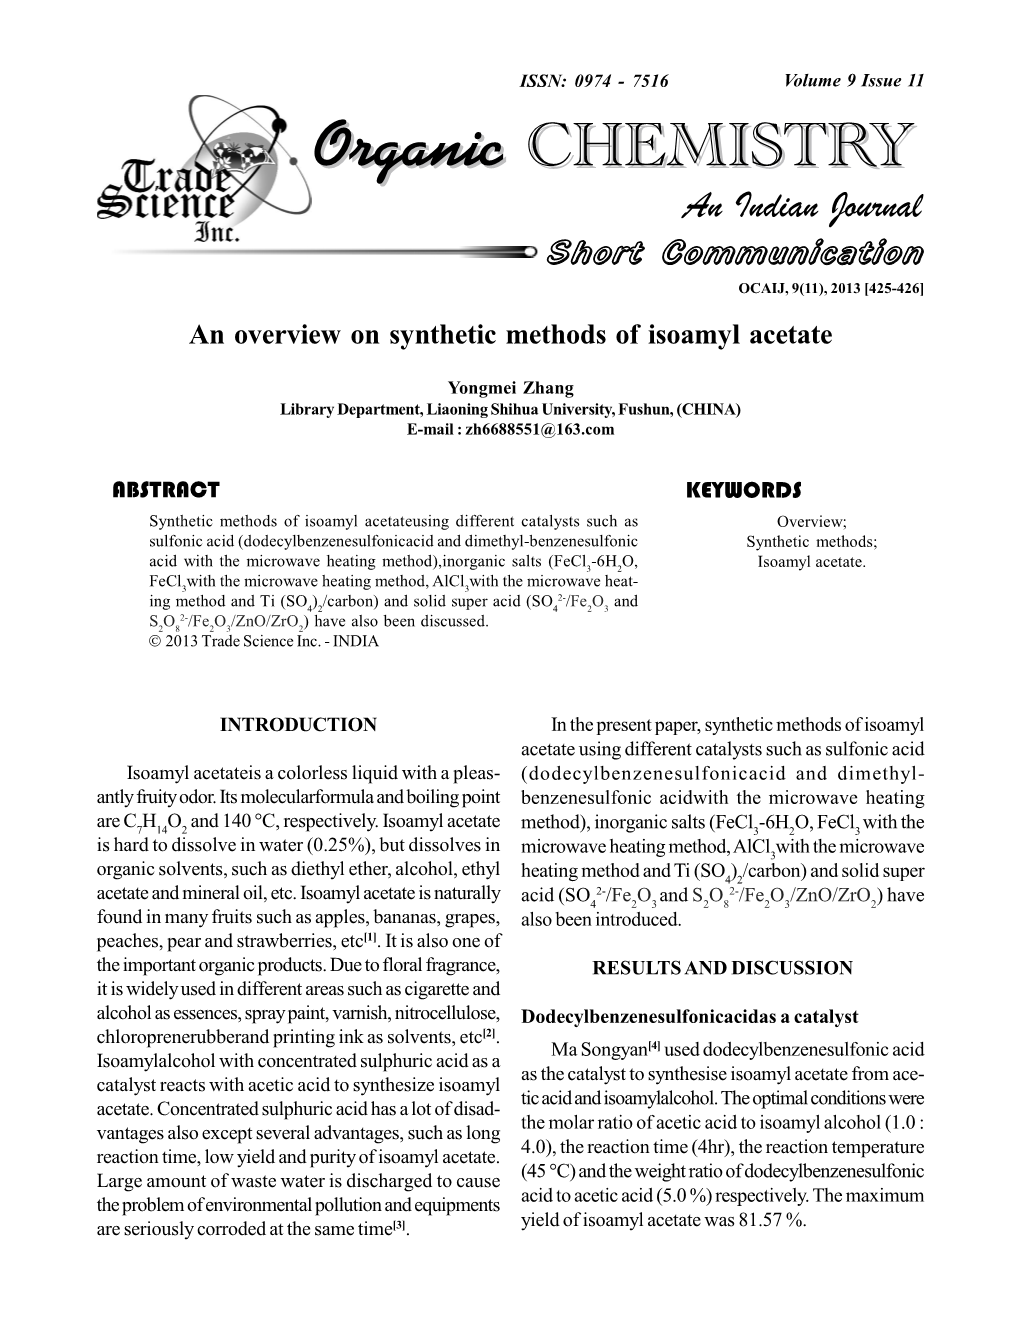 An Overview on Synthetic Methods of Isoamyl Acetate